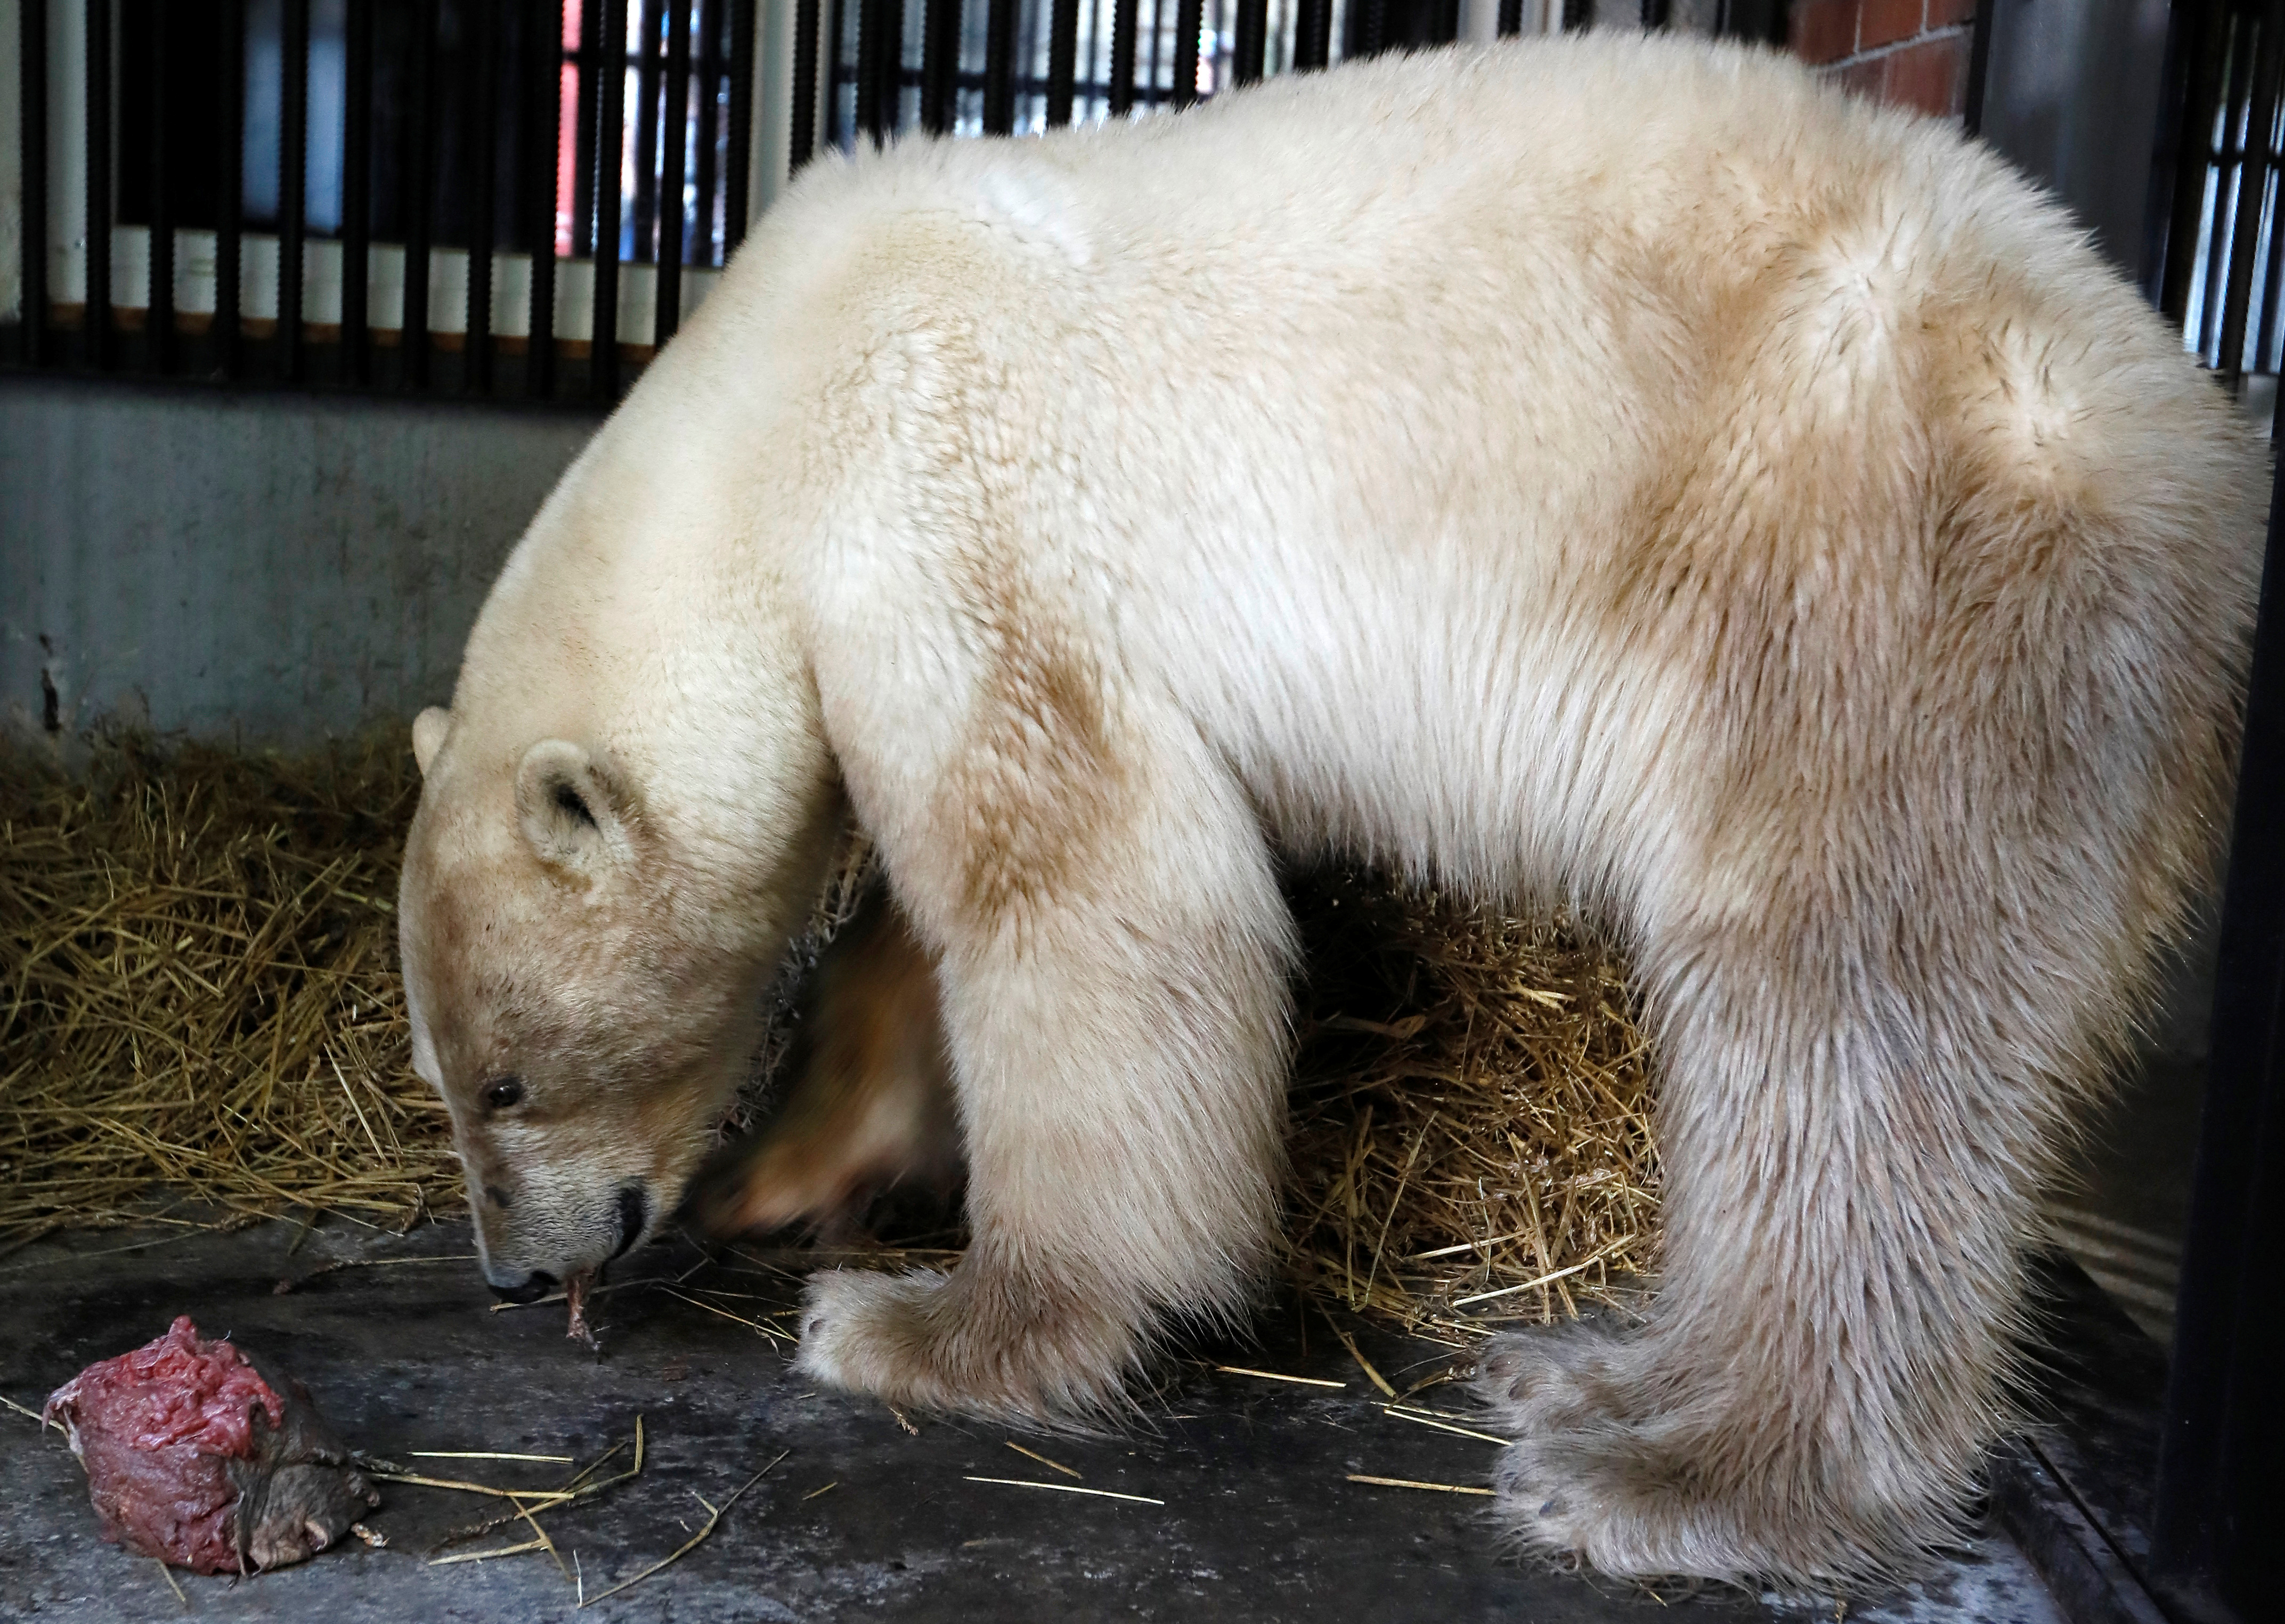 A female polar bear, which was found stray in the industrial city of Norilsk, eats meat inside a quarantine cage after arriving at the Royev Ruchey zoo in Krasnoyarsk, Russia June 21, 2019. REUTERS/Ilya Naymushin